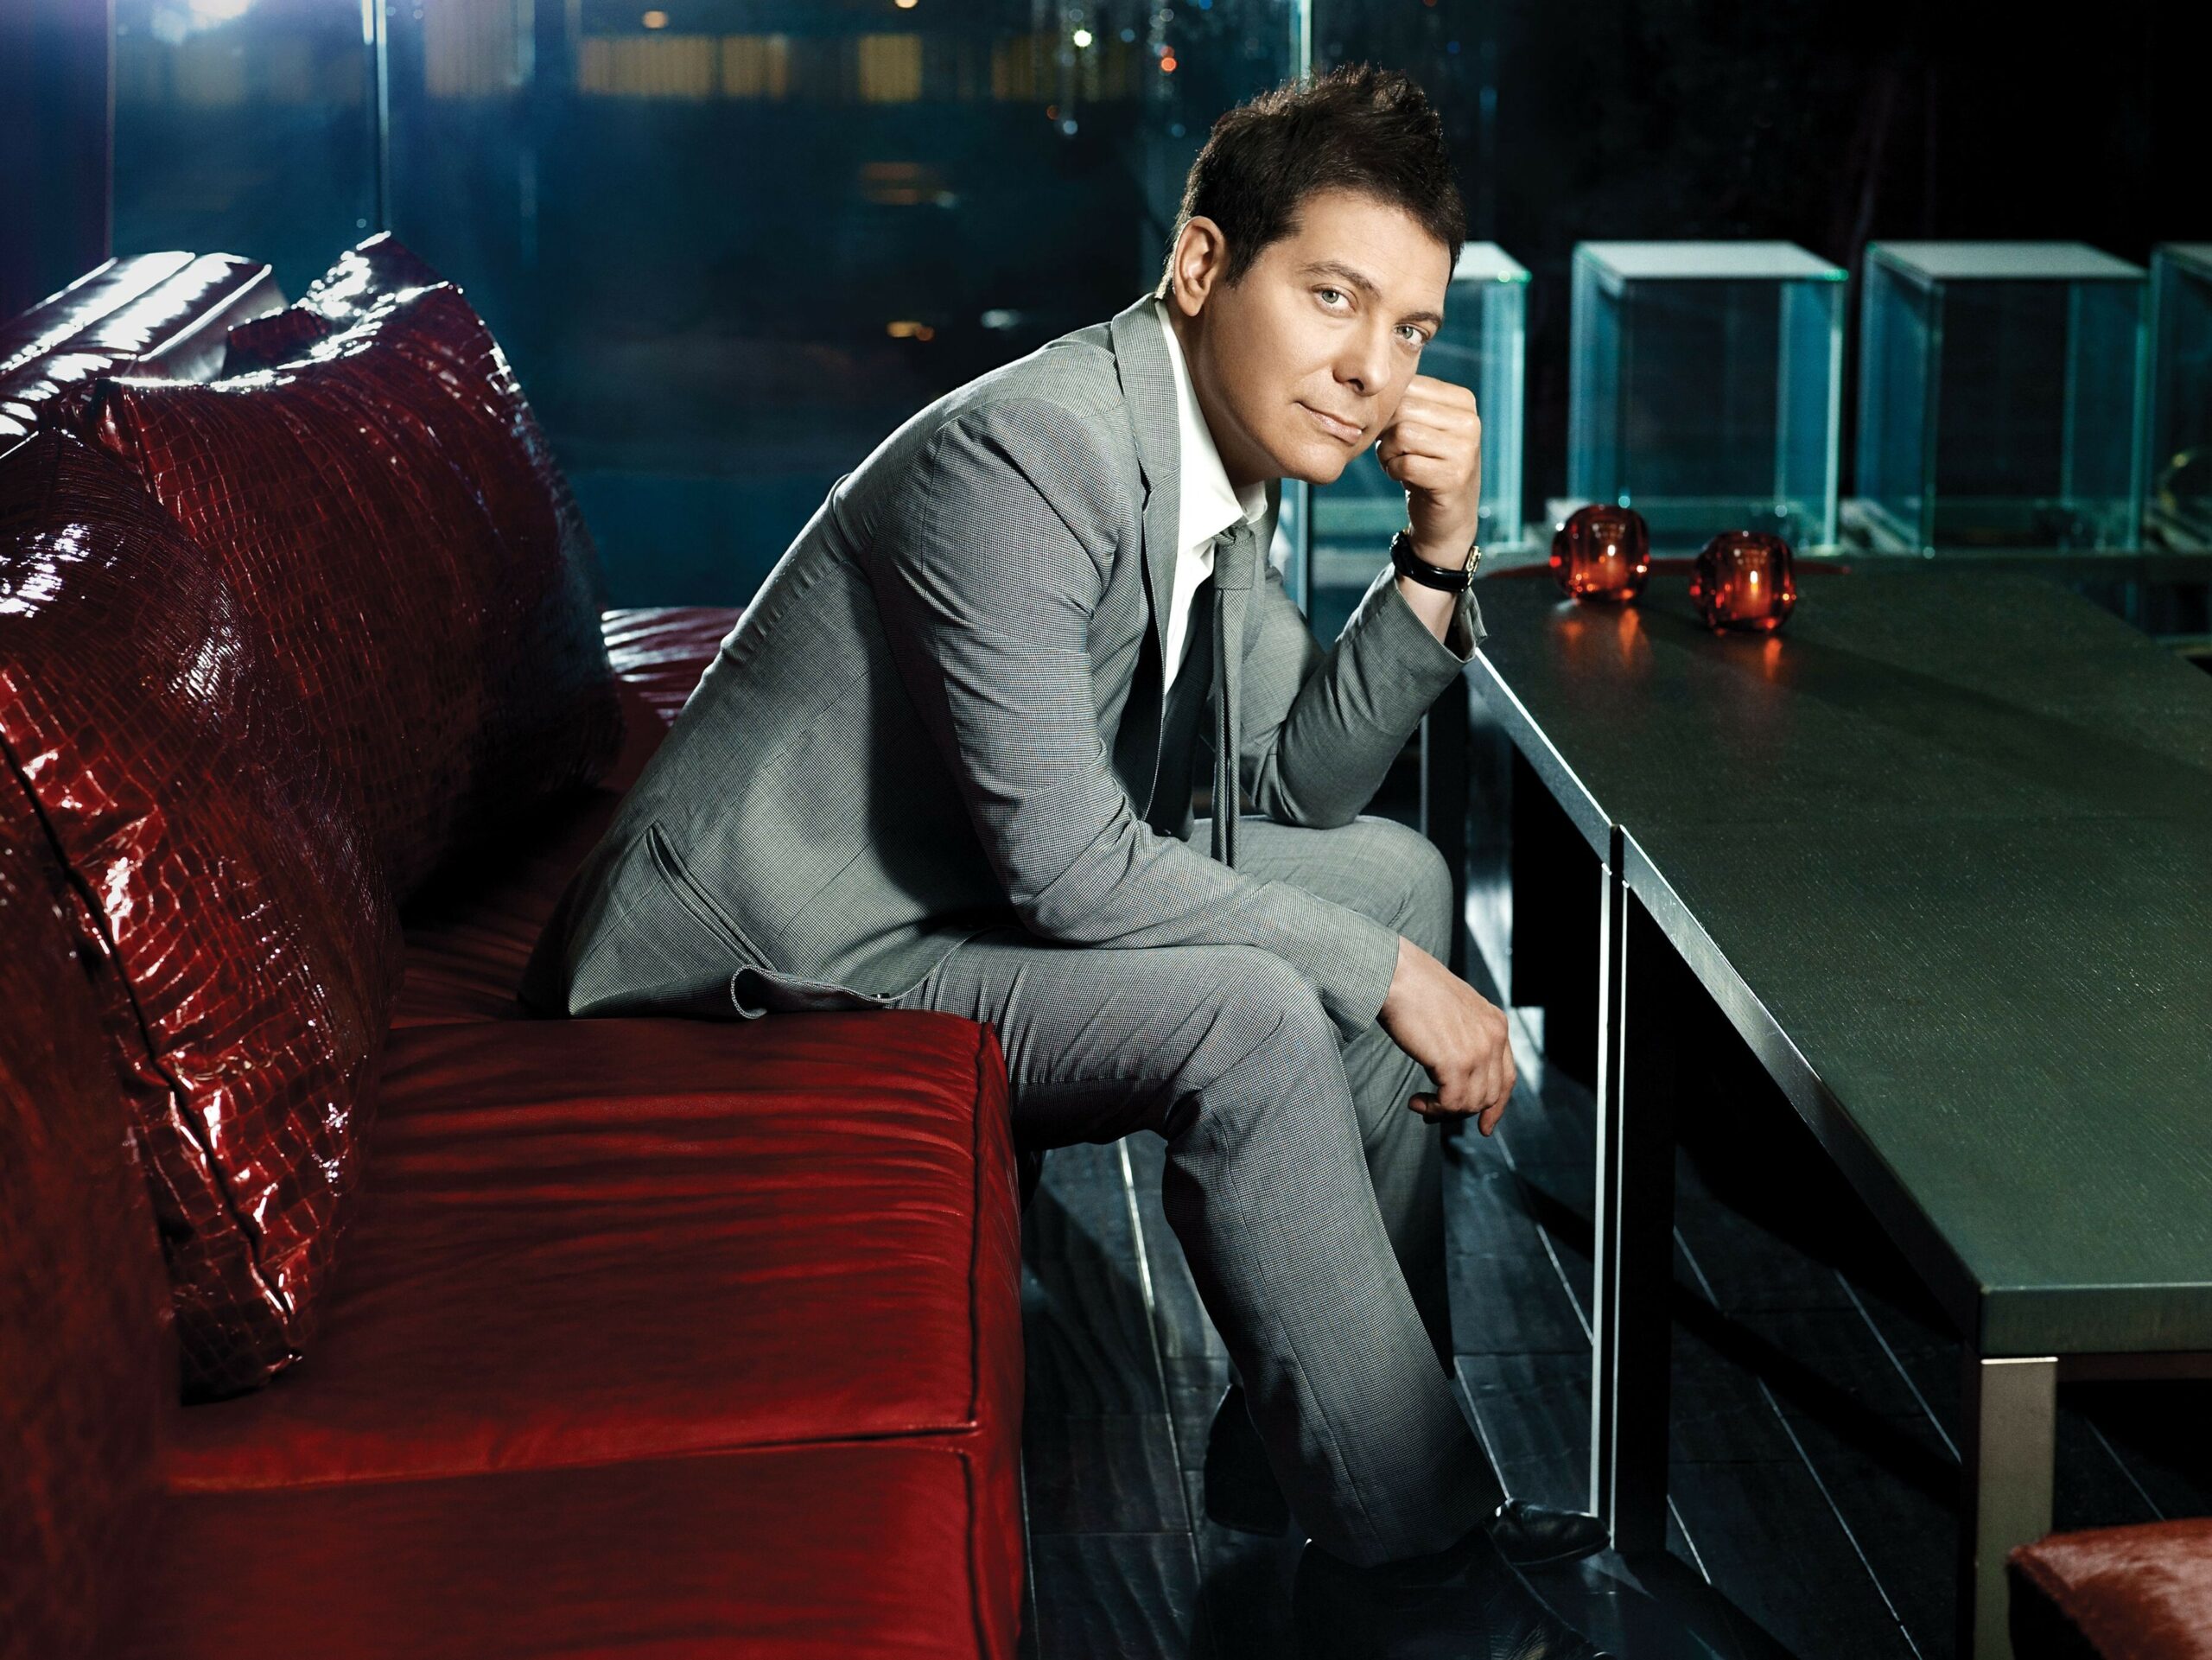 Singer, pianist, composer and arranger Michael Feinstein performs at WHBPAC on August 6. COURTESY WHBPAC